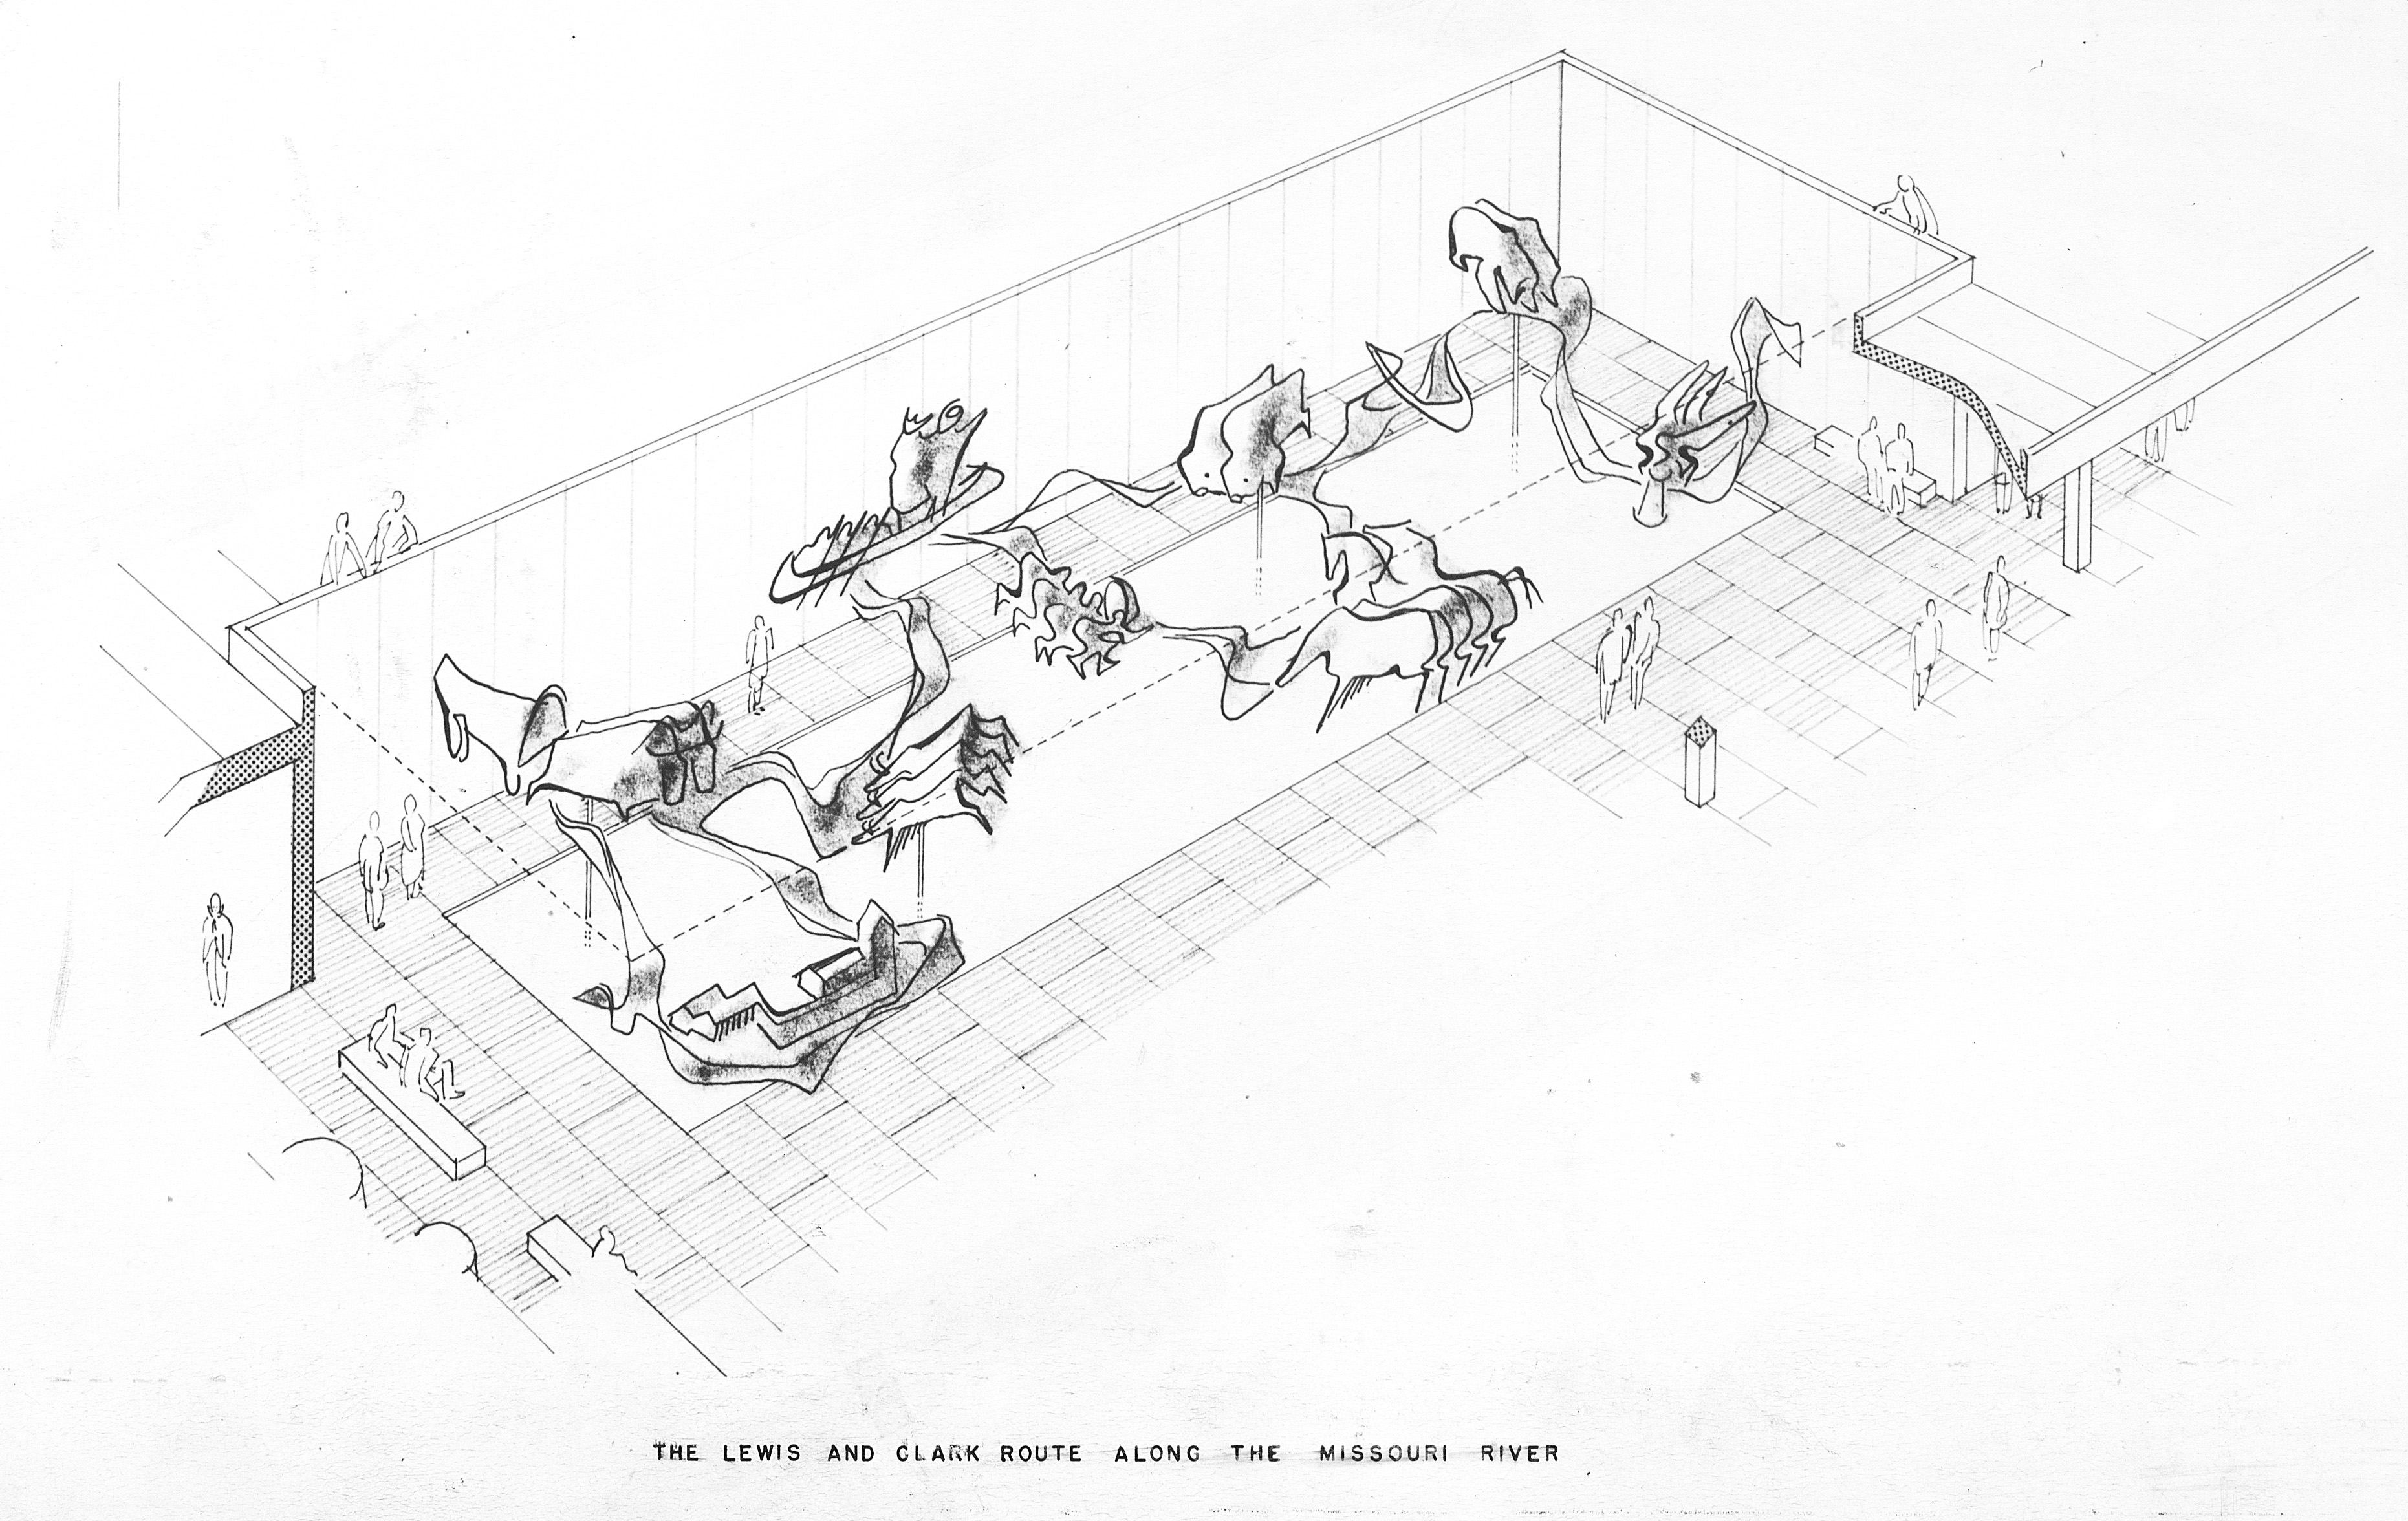 Sketch of sculptures from the architectural competition submission 